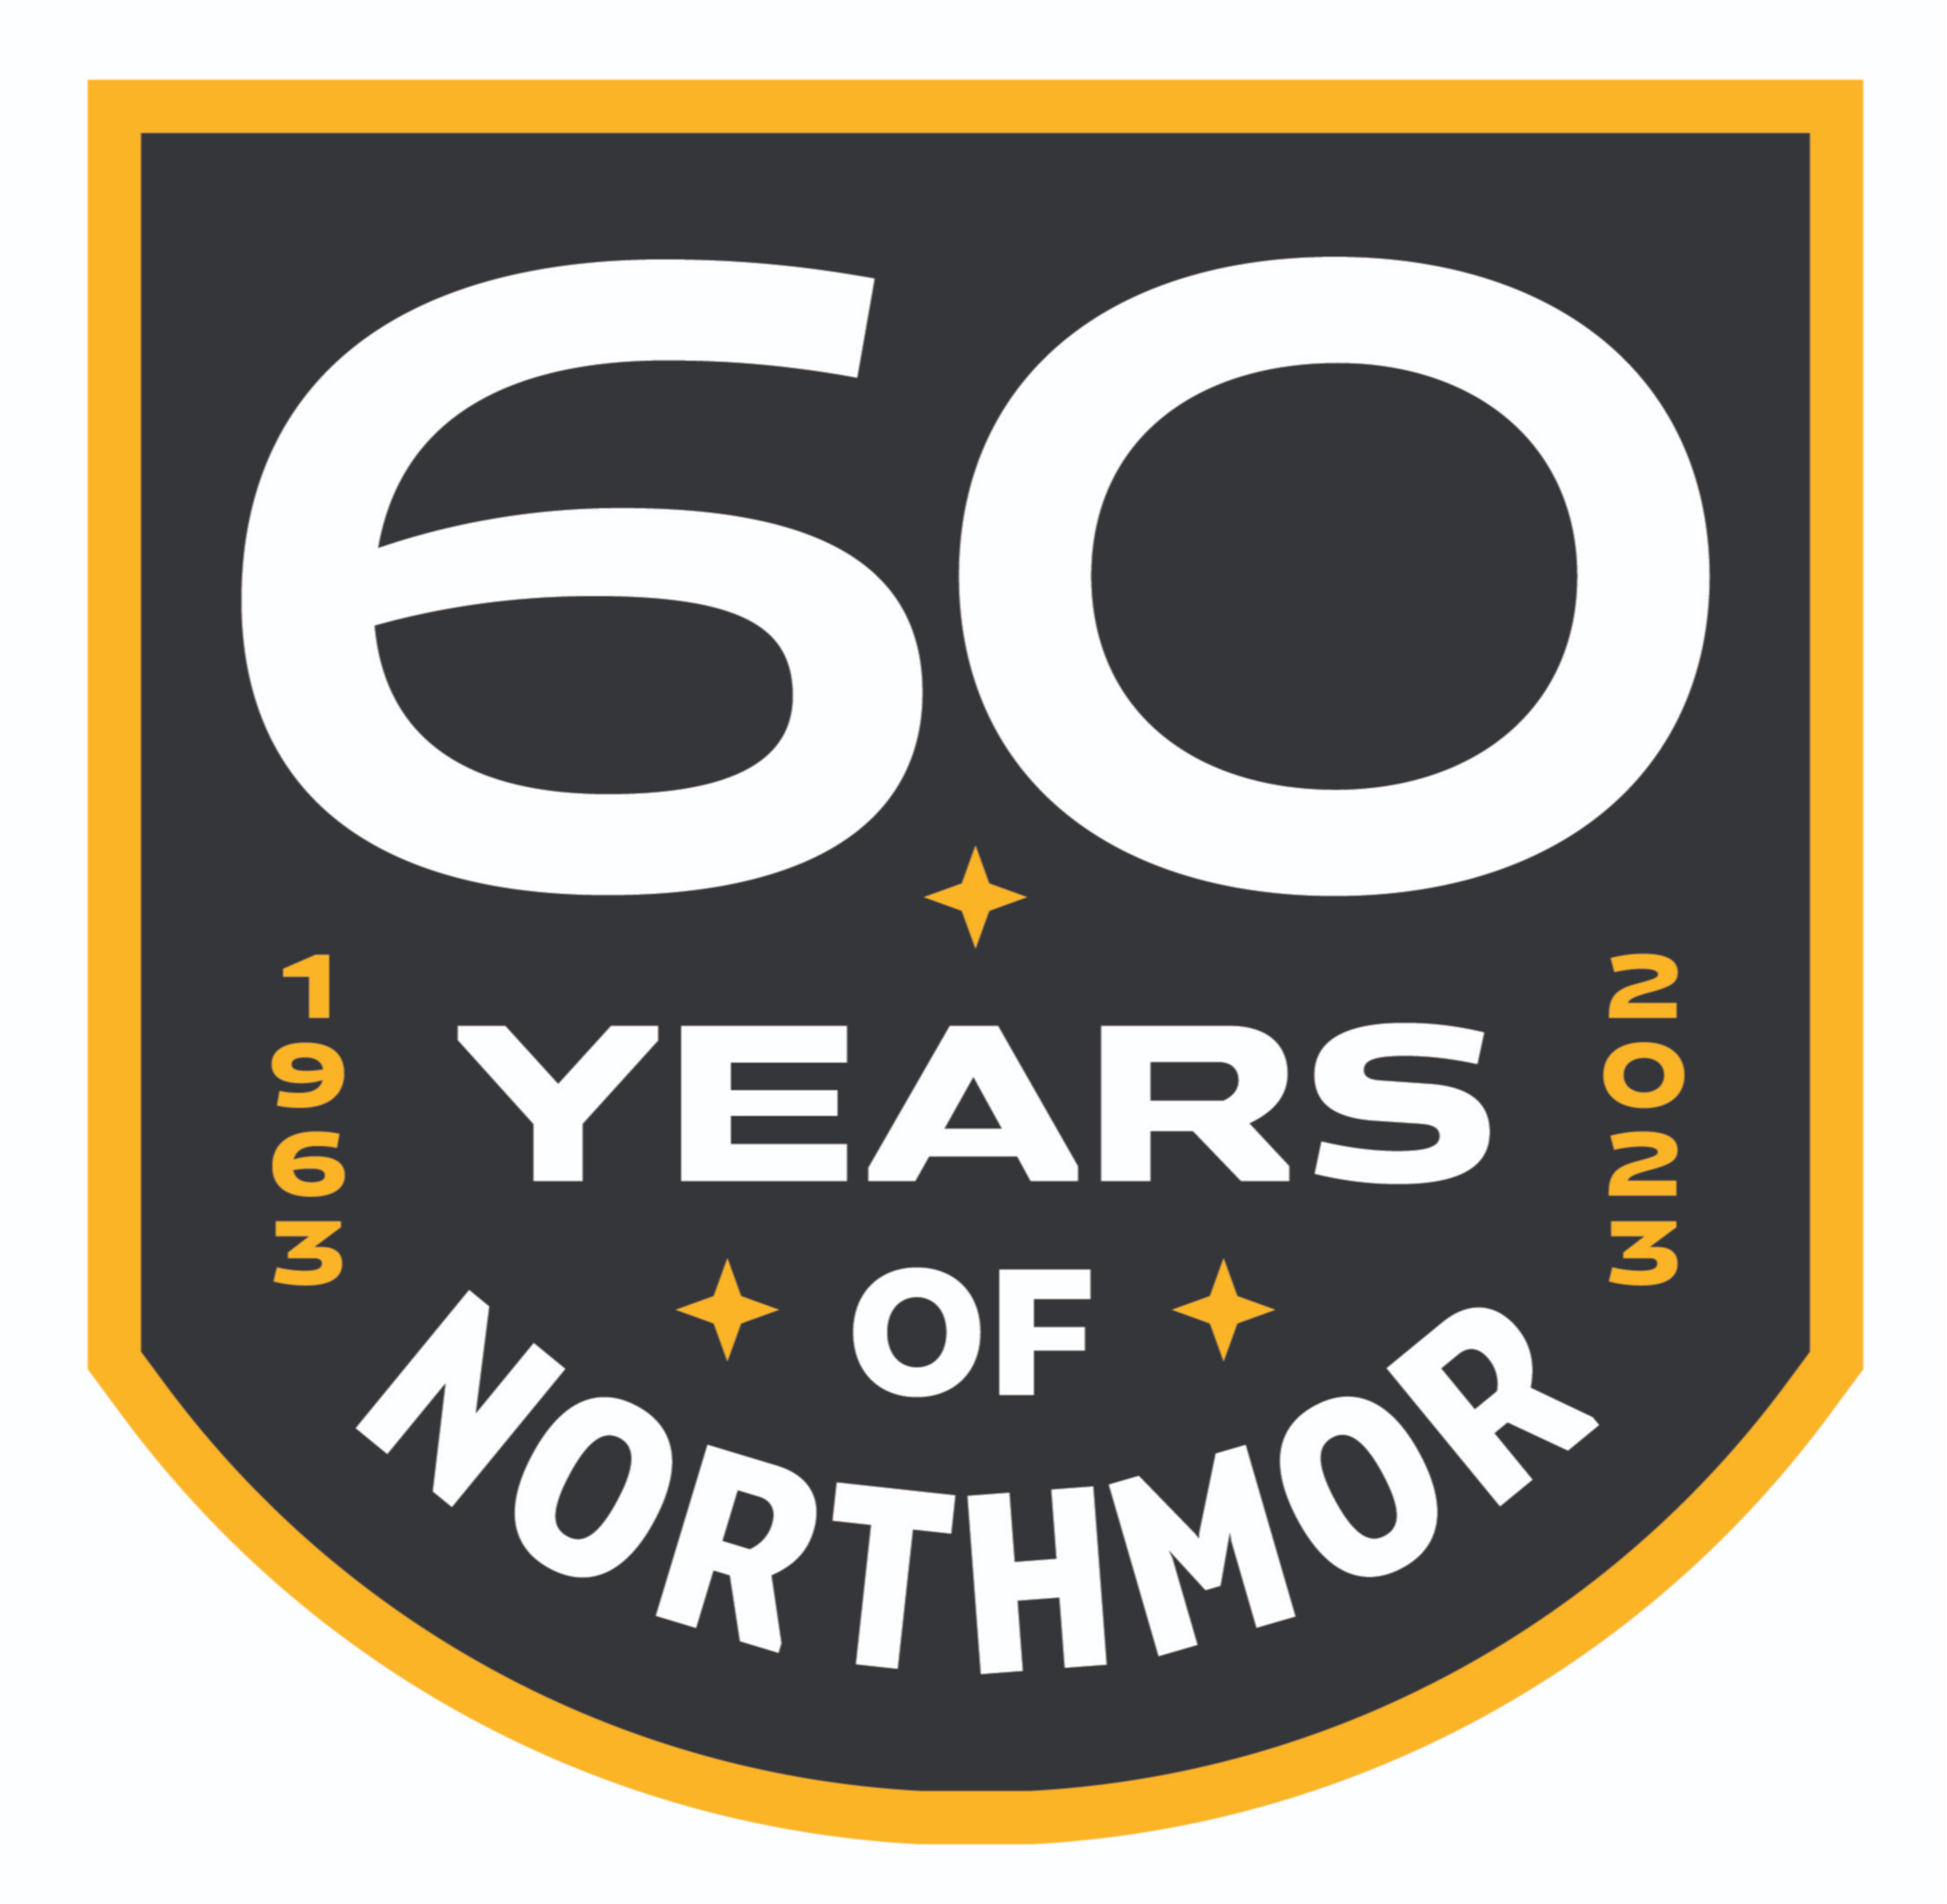 60 years of northmor 1963 2023 in white and gold on black shield with gold trim